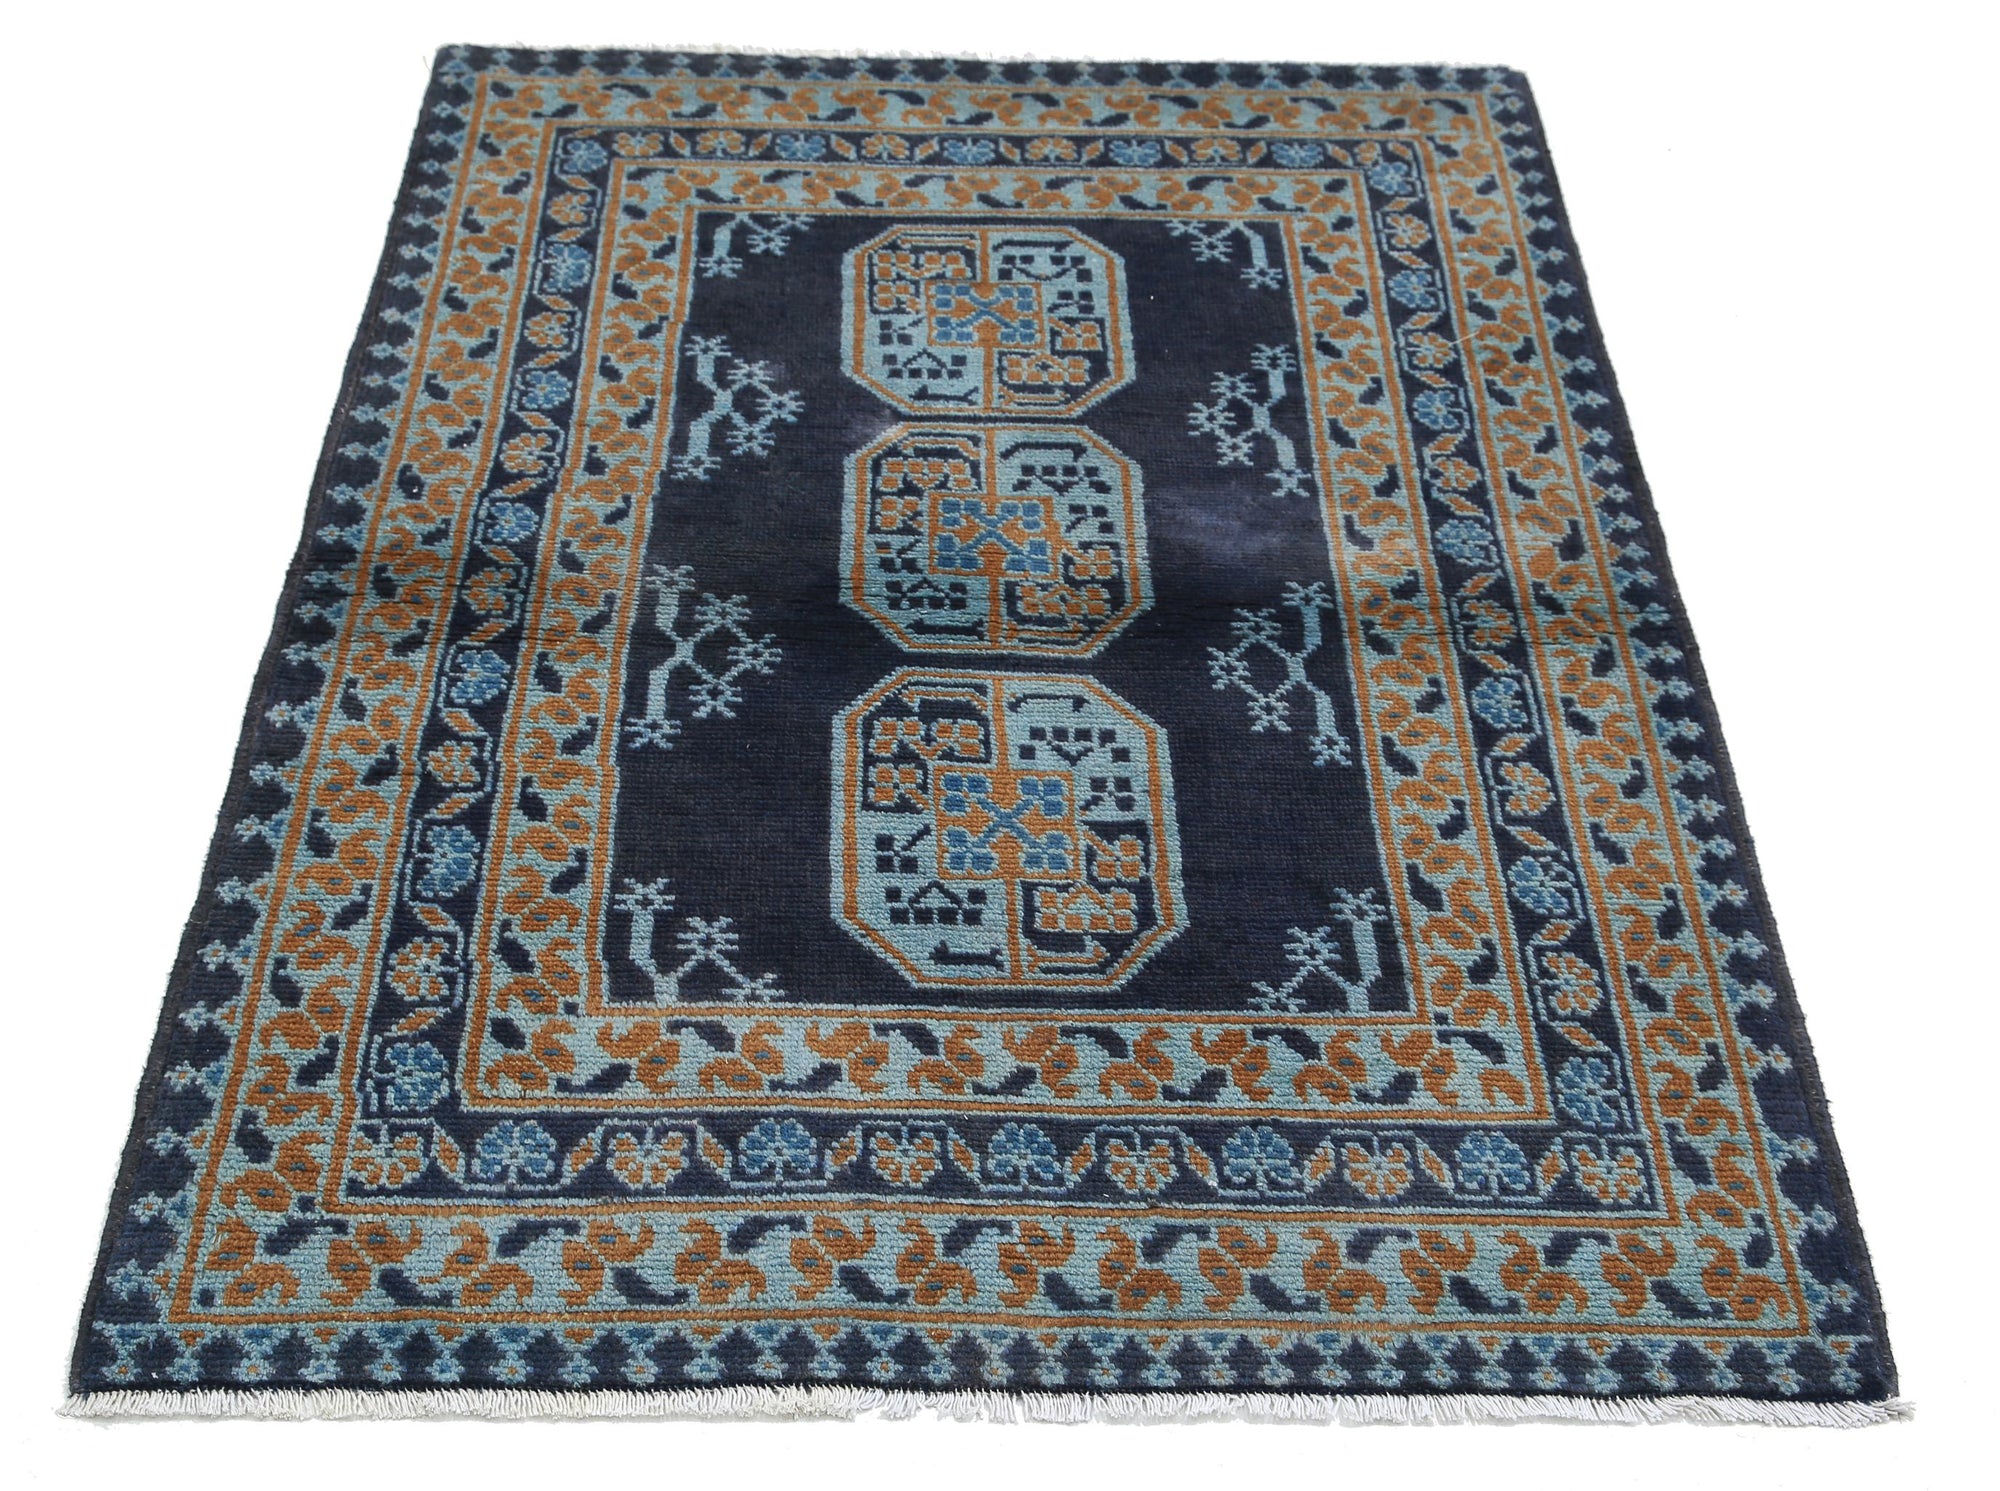 Revival-hand-knotted-gul-collection-wool-rug-5014101-3.jpg